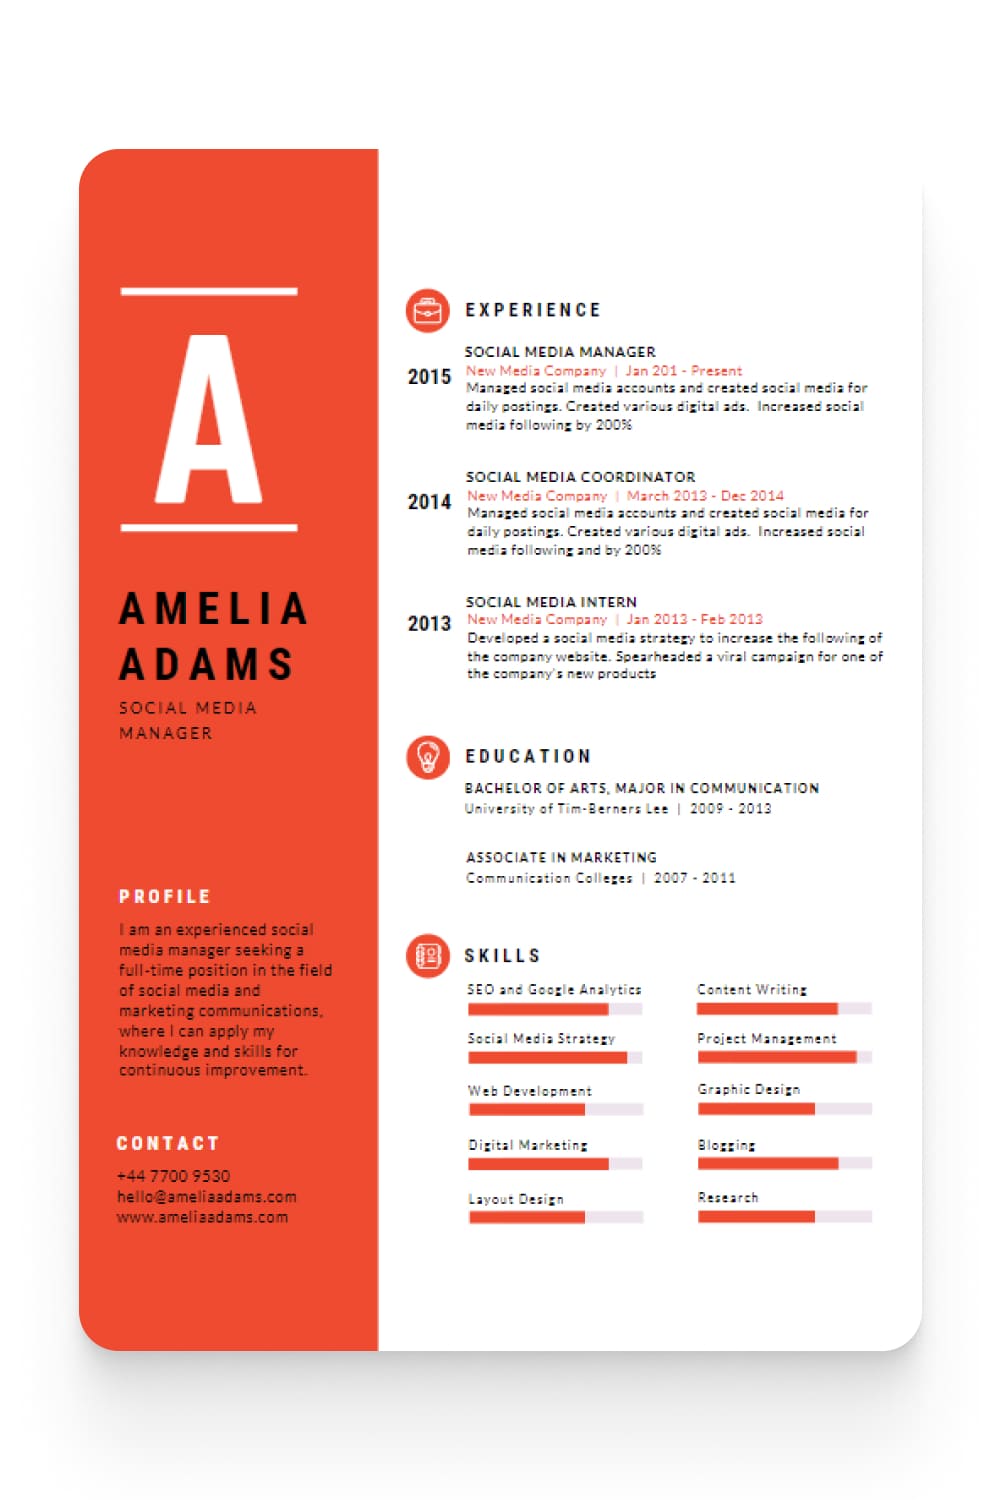 Resume with red column of contacts and white experience.